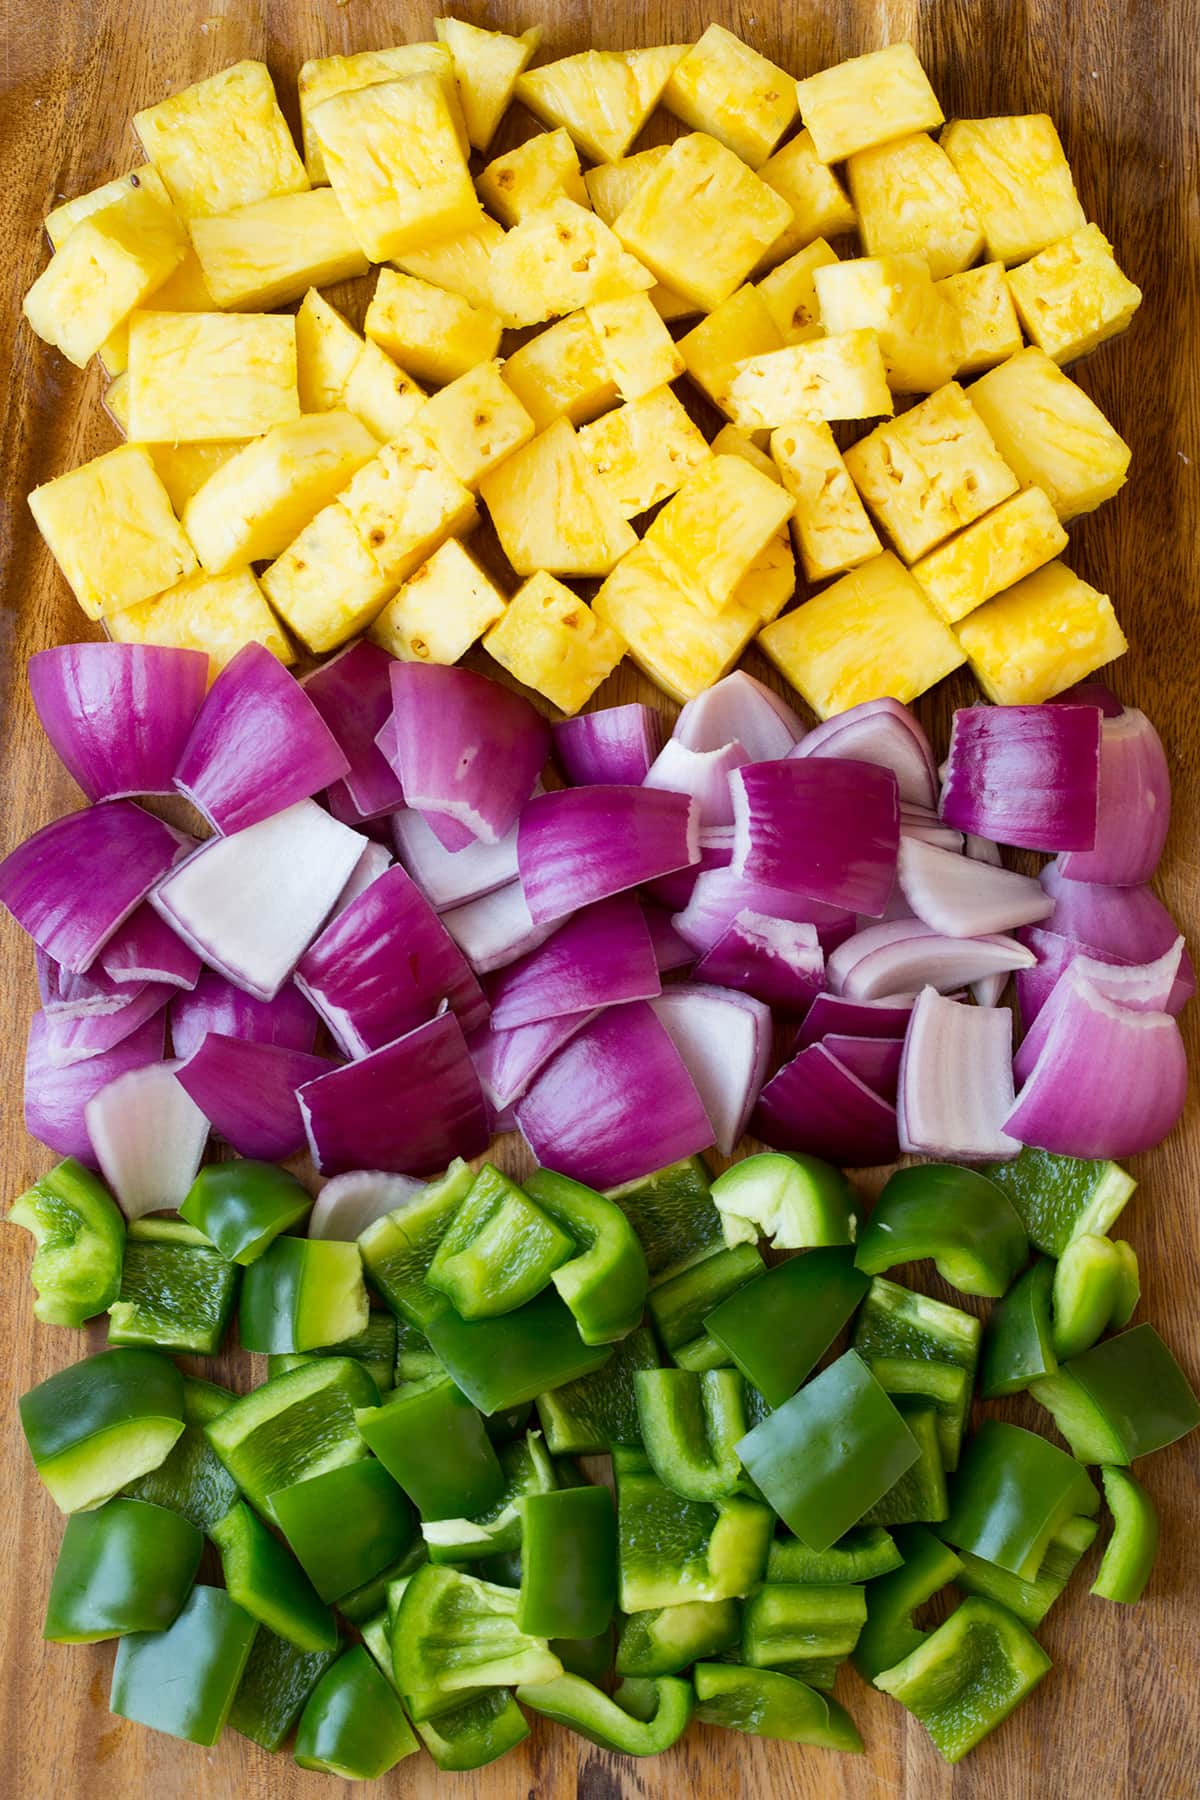 Pineapple red onion and bell pepper pieces on a wooden cutting board.